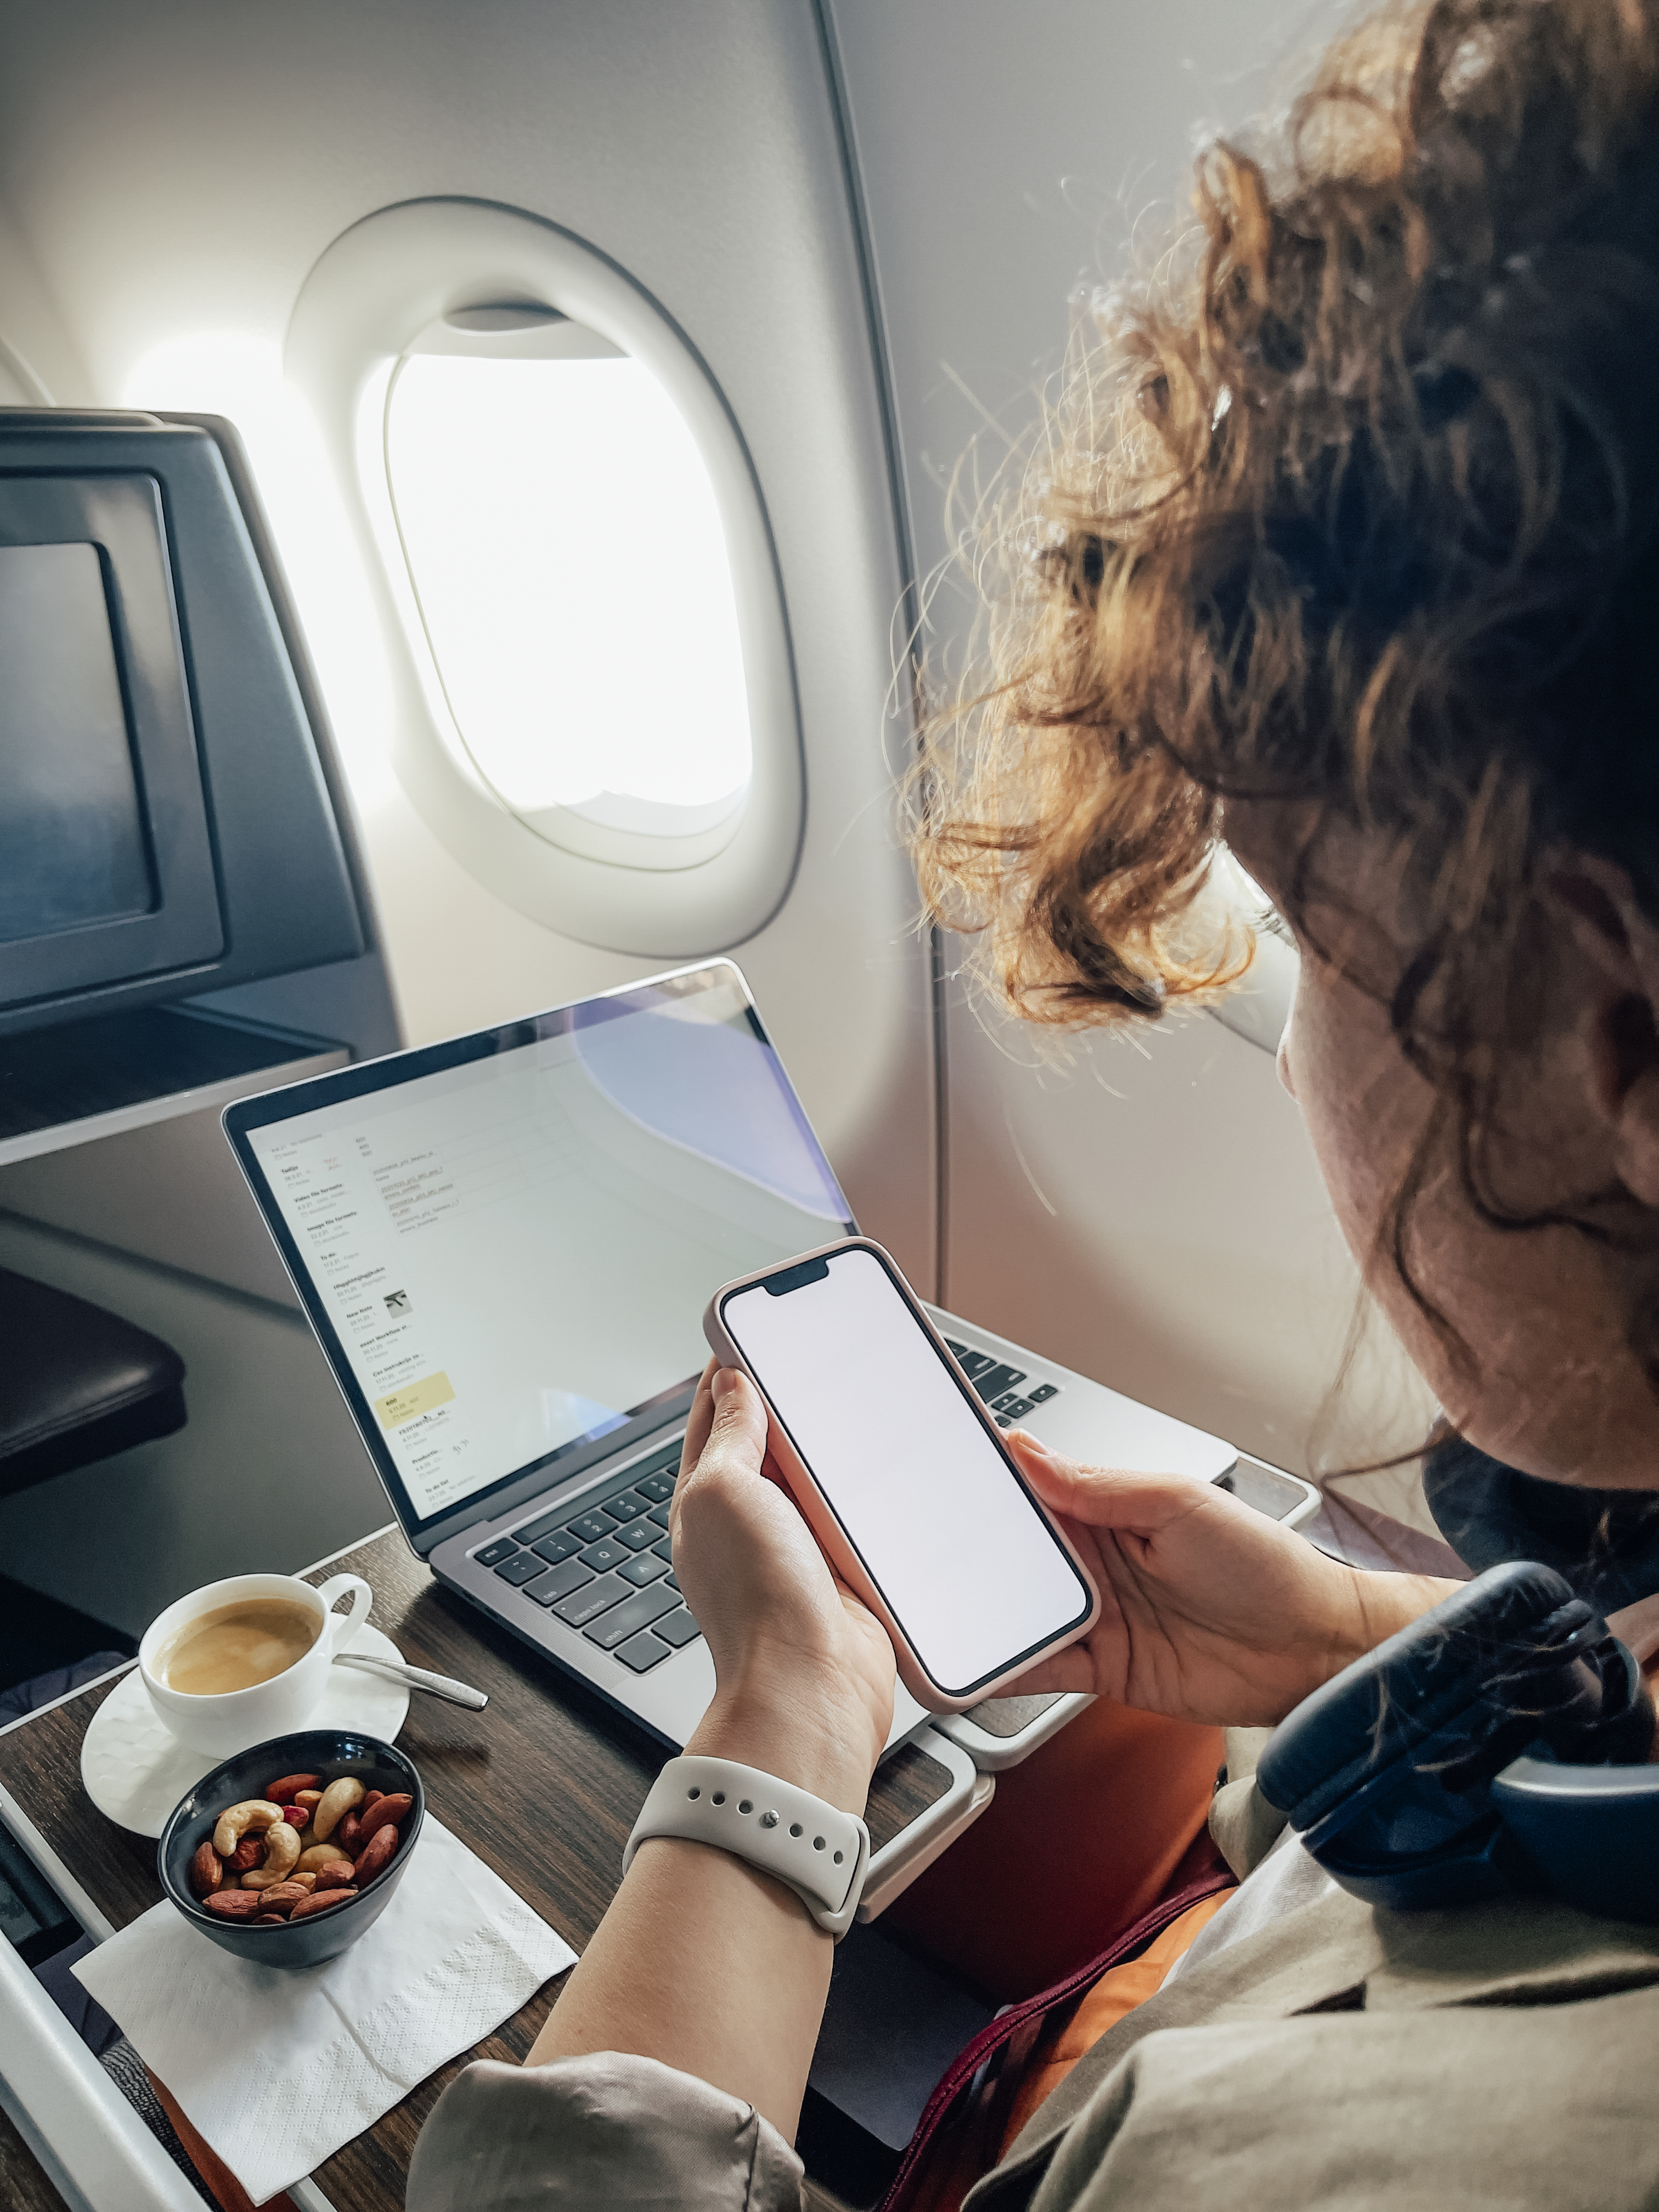 Customers will soon be able to log on and peruse online on domestic routes (Stock photo)